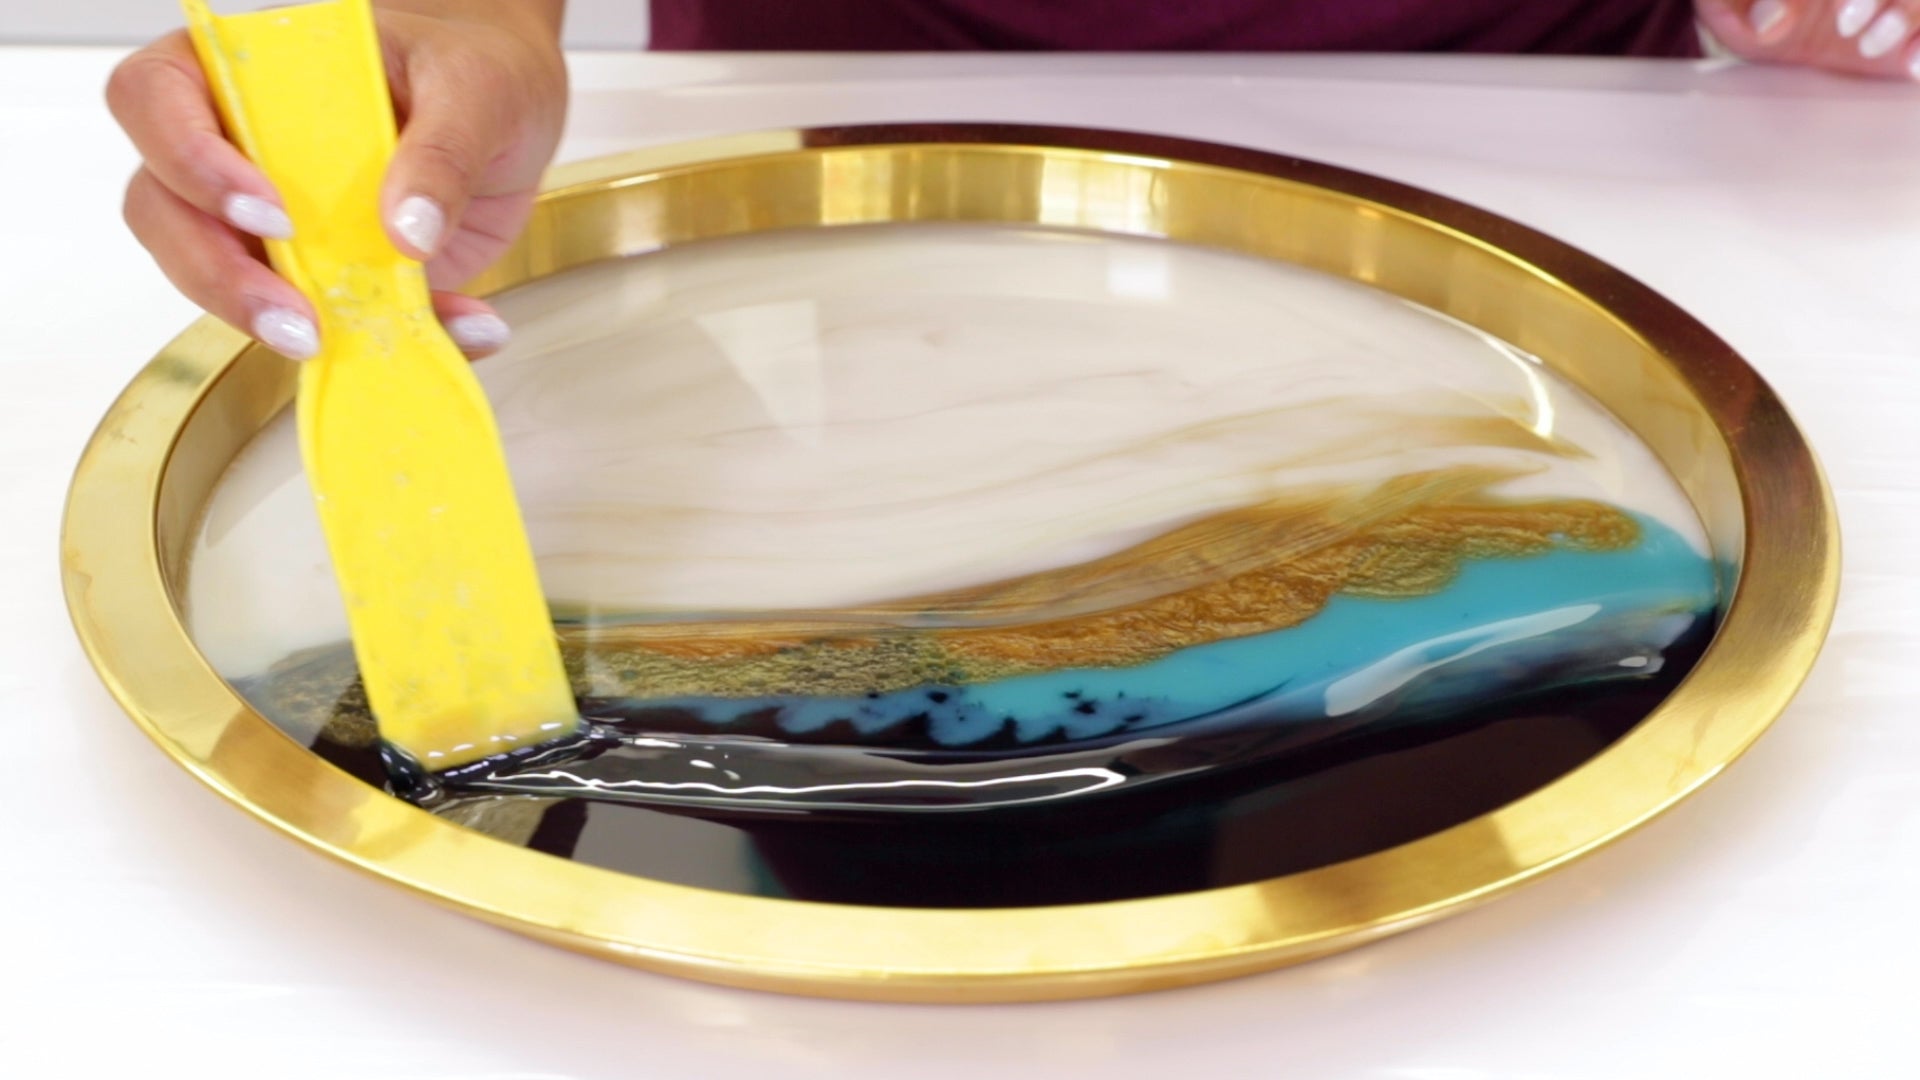 Create Resin Flow Art - Gently run a spatula through the resin to create a pattern